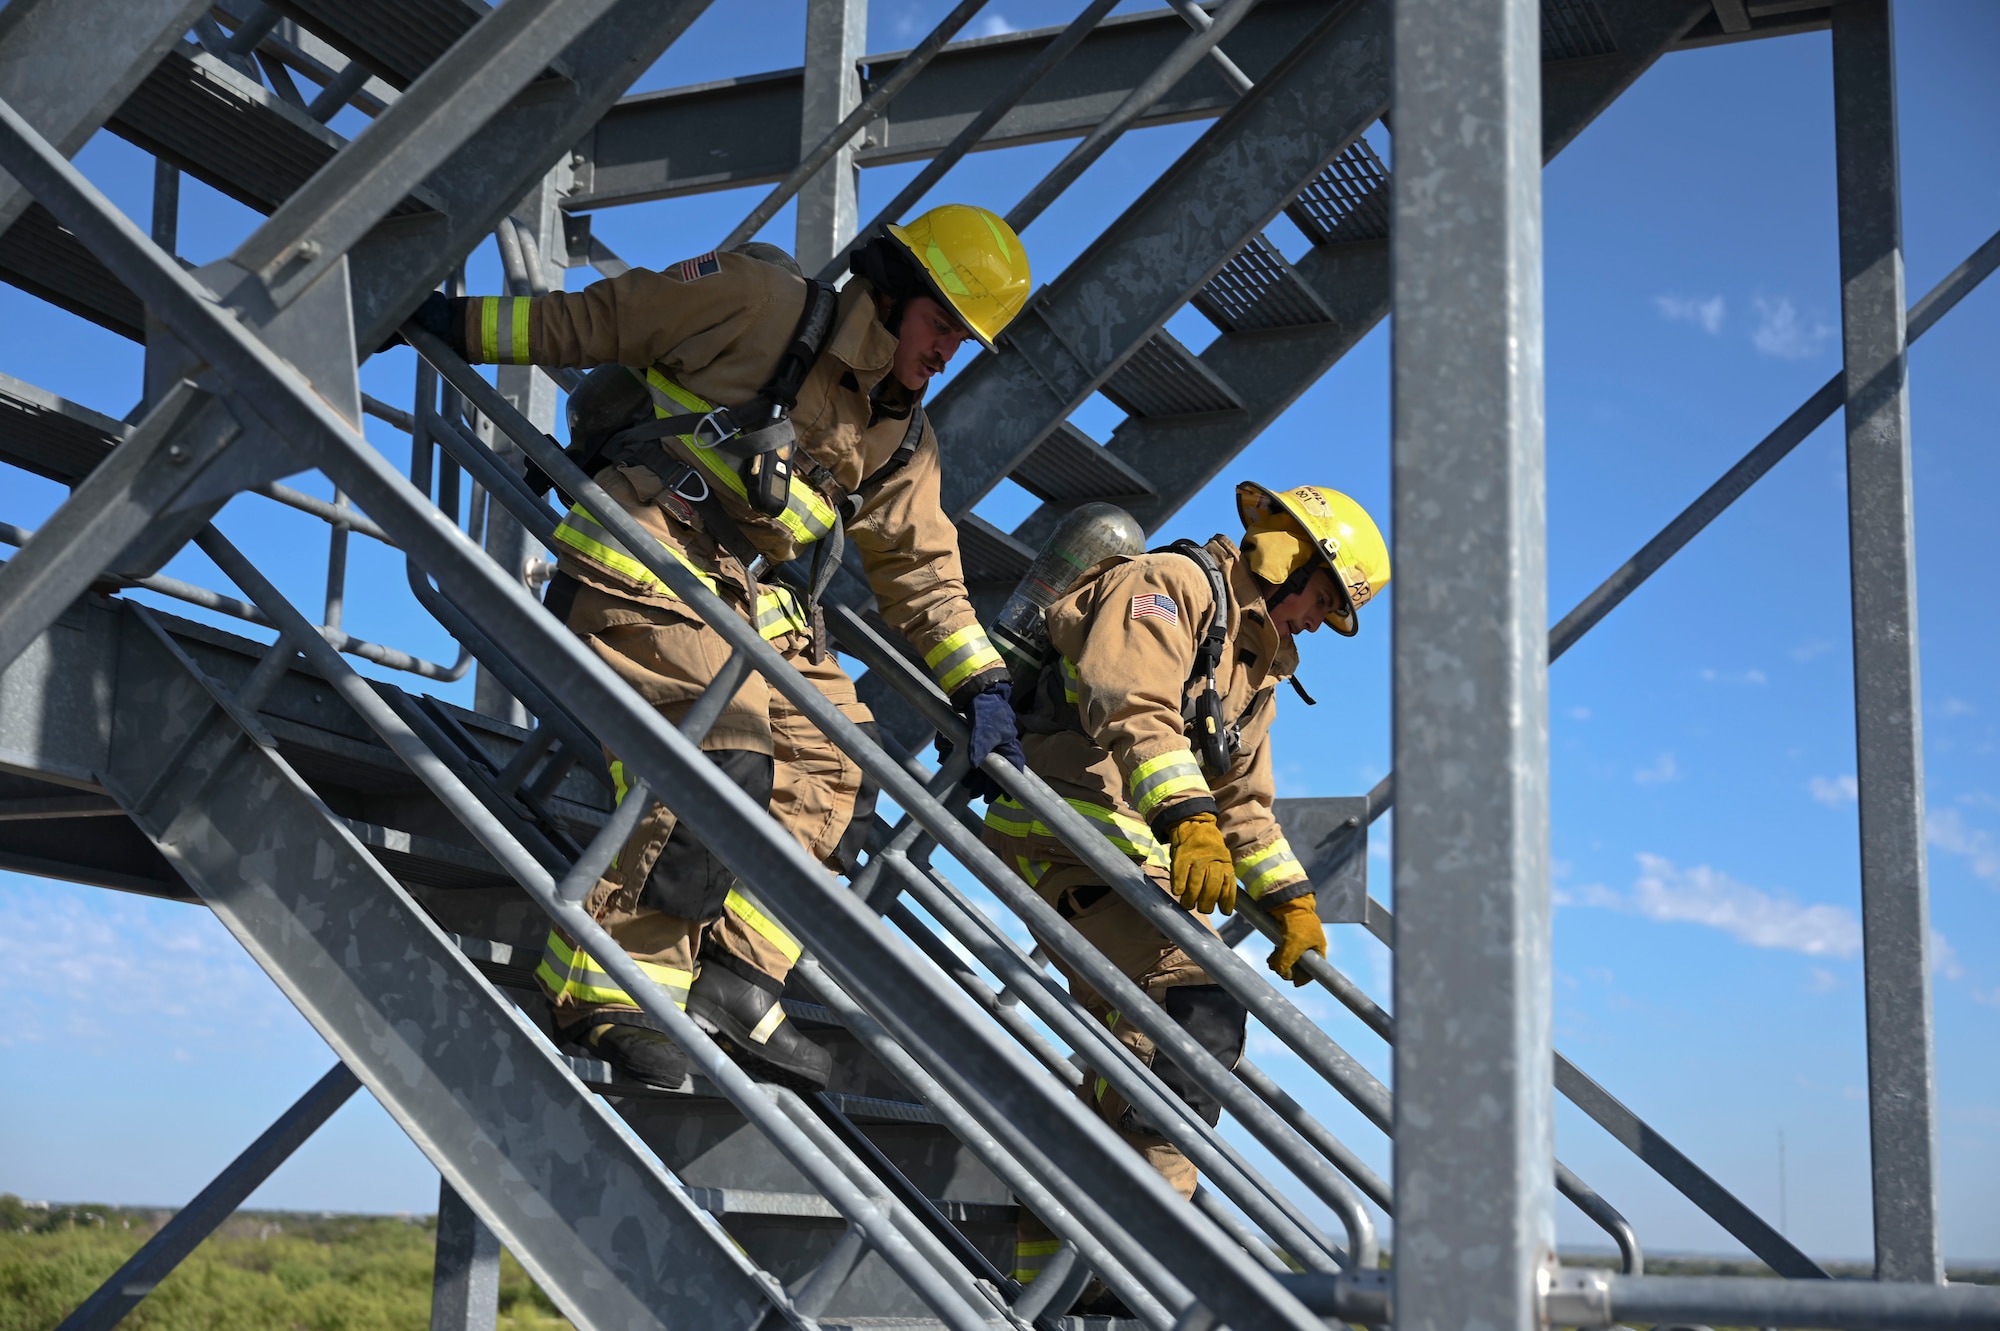 Members assigned to the 312th Training Squadron participate in a combat challenge during the 11th Annual Blood, Sweat and Stairs event at the Louis F. Garland Department of Defense Fire Academy, Goodfellow Air Force Base, Texas, Sept. 9, 2023. Fire academy students went head-to-head with their instructors and peers to compete for the title of Combat Challenge Champions. The combat challenge consisted of challenges that simulated different challenges firefighters faced while responding to the 9/11 terrorist attacks. (U.S. Air Force photo by Airman 1st Class Madison Collier)